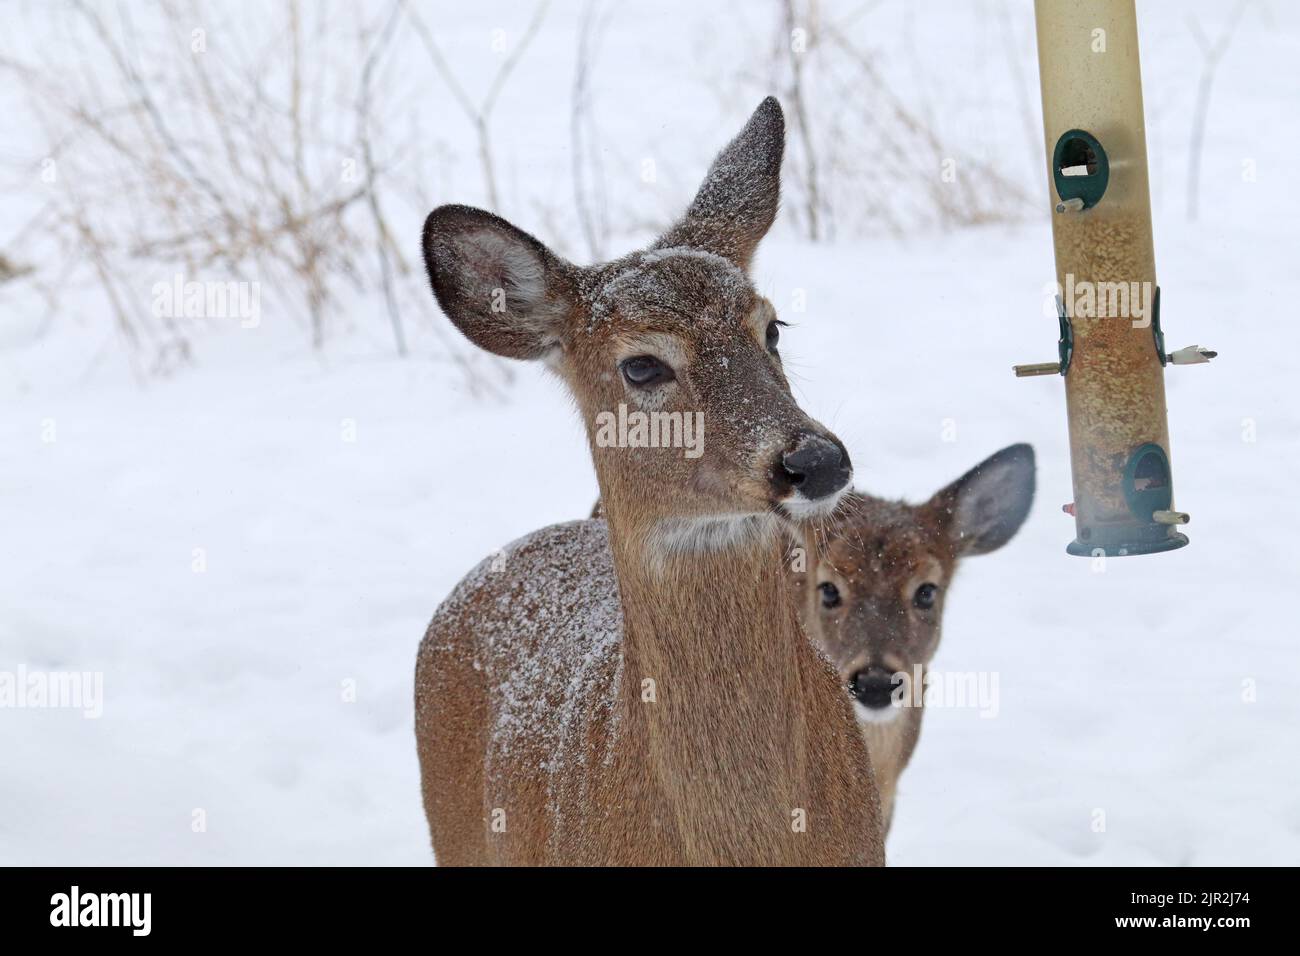 Two adult white-tailed deer (Odocoileus virginianus) raid a bird feeder in Indiana, USA with snow in winter Stock Photo